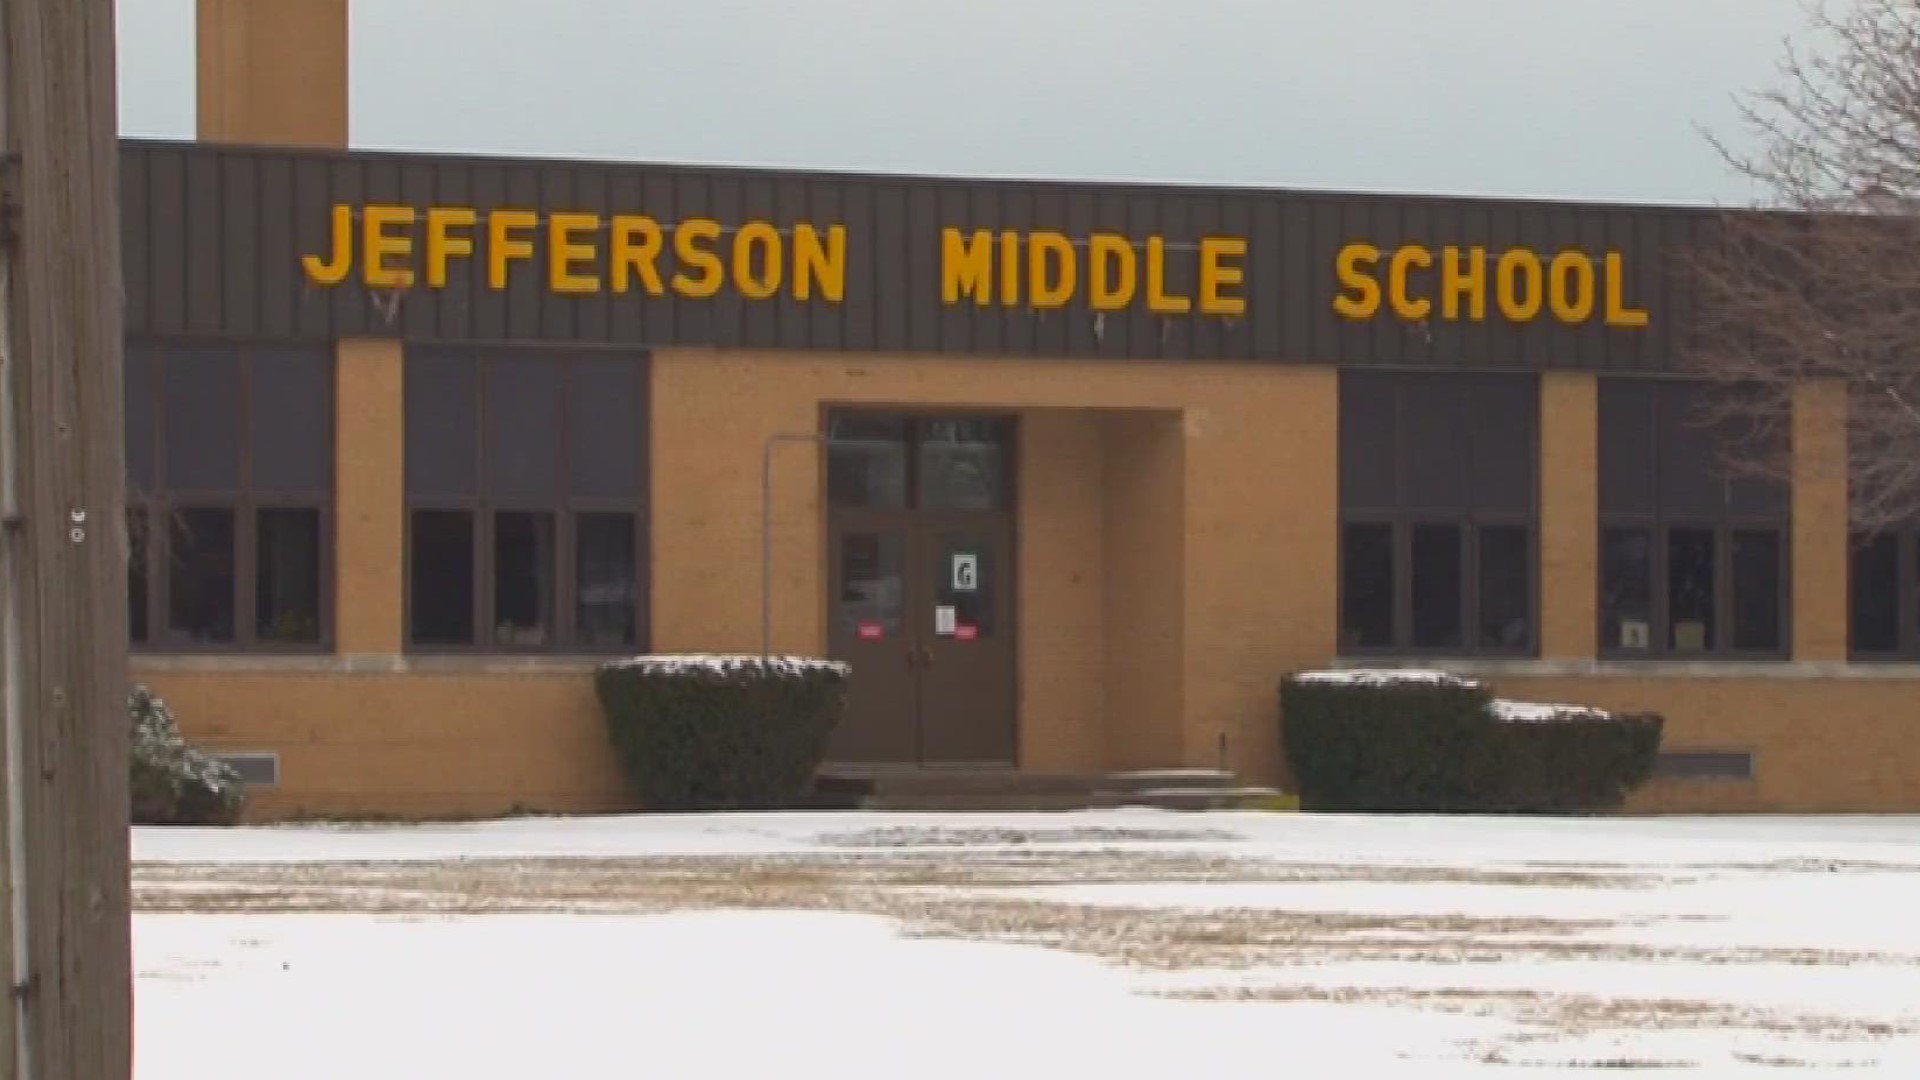 The Monroe County Sheriff's Office gave an 'all clear' following a shelter-in-place lockdown at Jefferson Middle School.